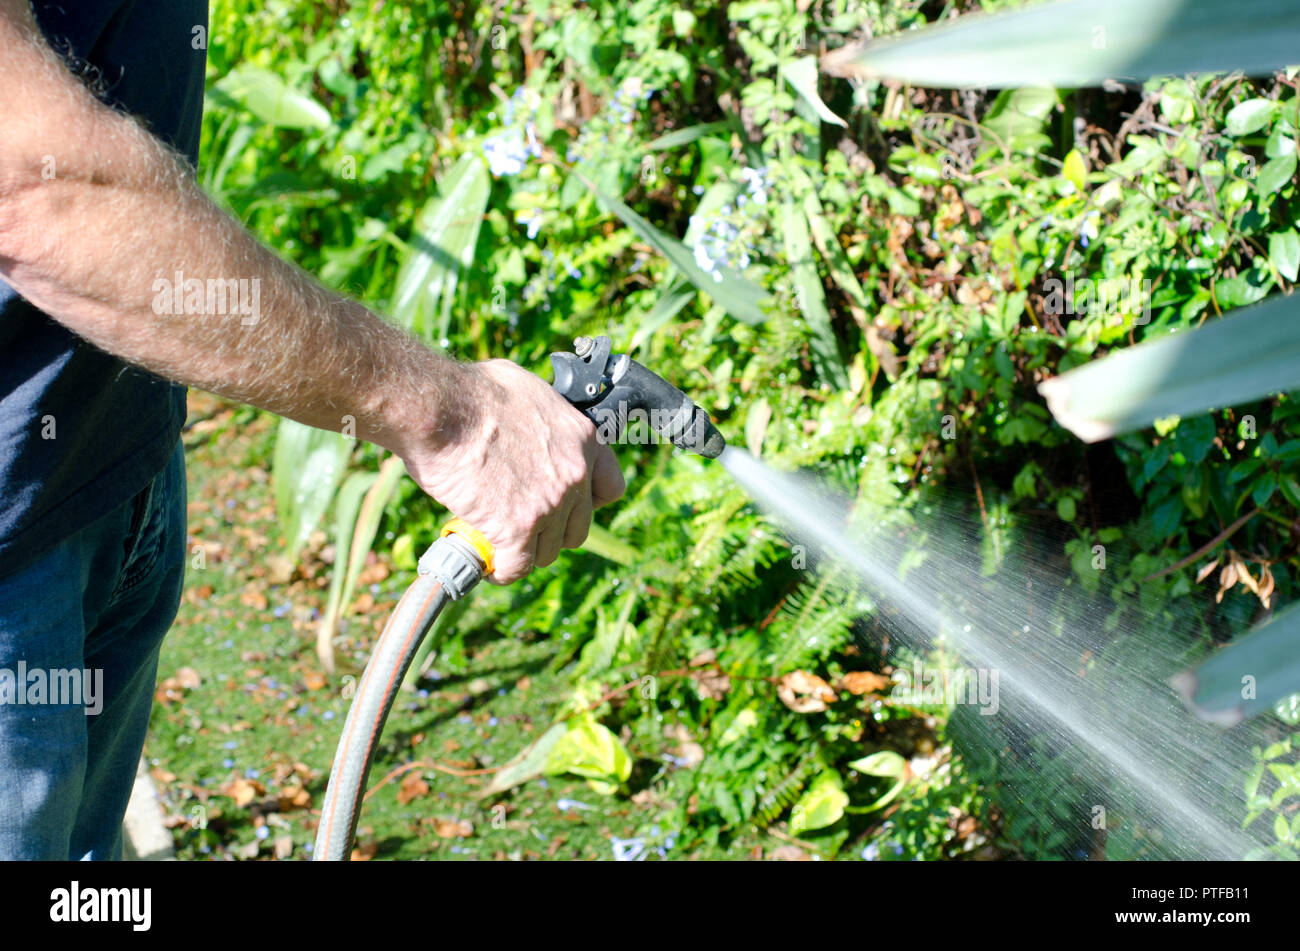 Watering the garden with a hosepipe Stock Photo